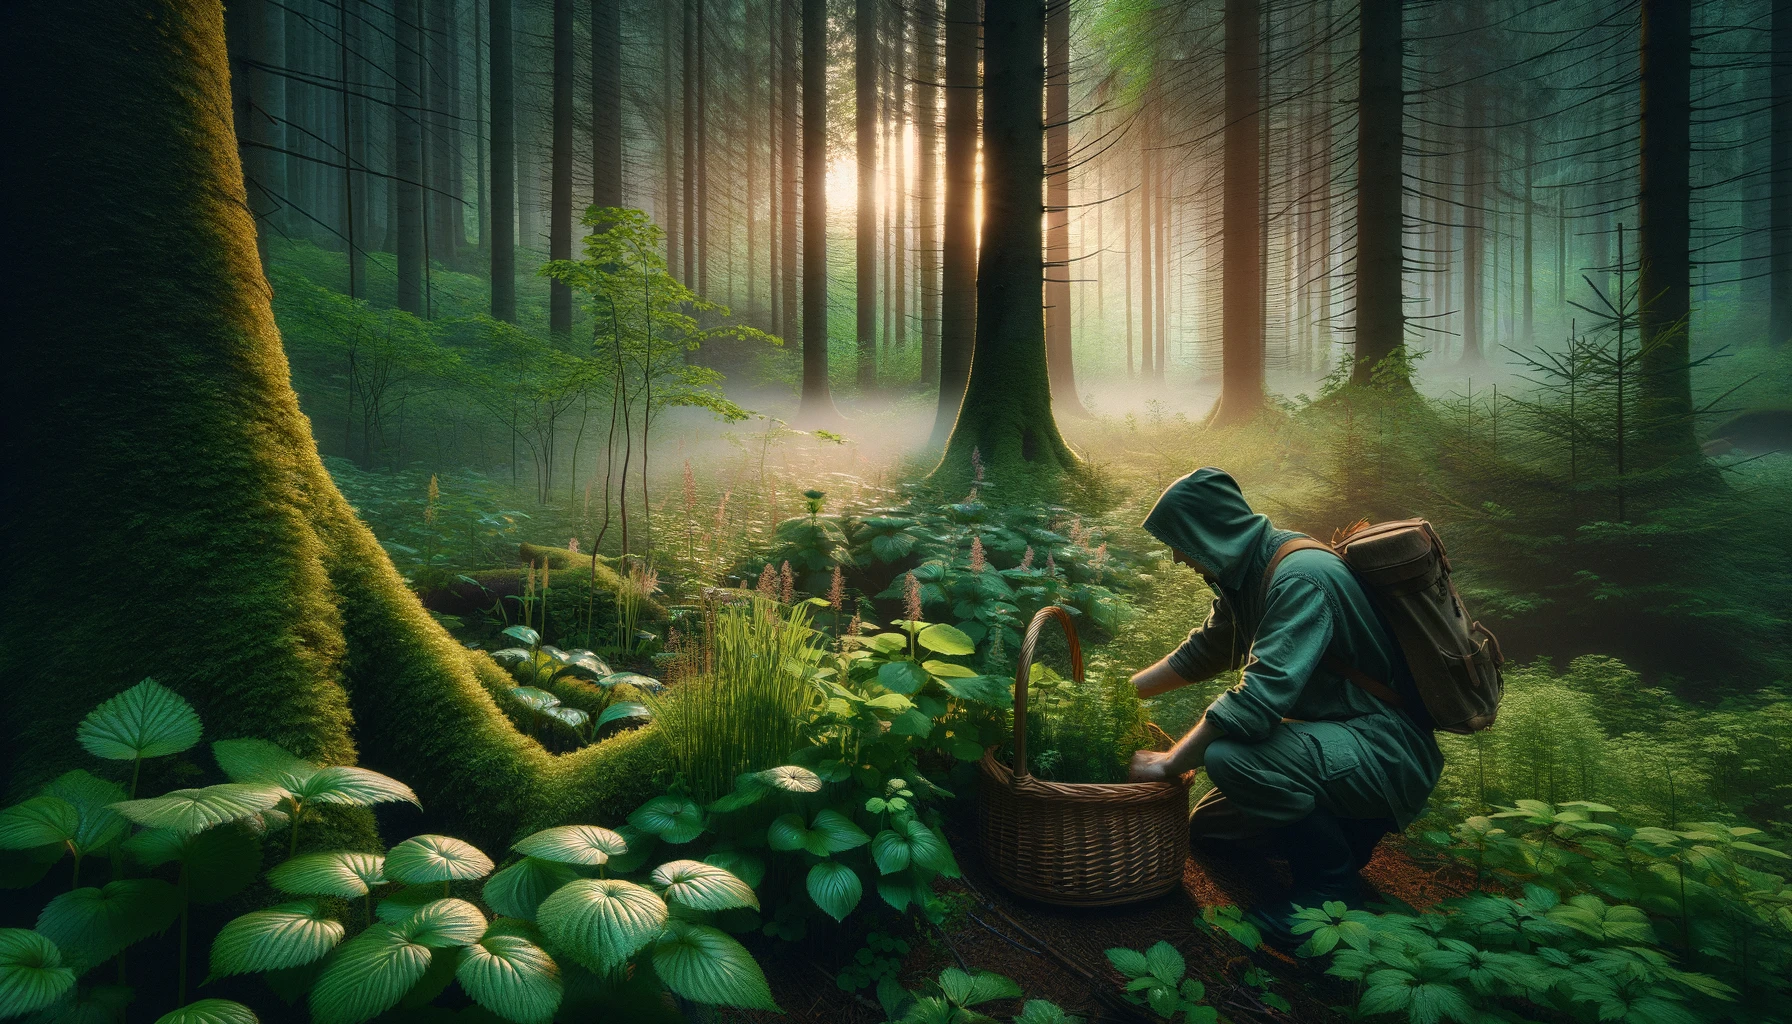 Person in outdoor attire kneeling and foraging for wild medicinal plants in a misty, dense forest at dawn. The basket beside them holds an array of freshly picked greenery, highlighting their knowledge and respect for nature. The scene, bathed in the soft light of dawn, evokes tranquility and a deep connection to the healing power of the wild, perfectly capturing the adventurous spirit of foraging for natural remedies